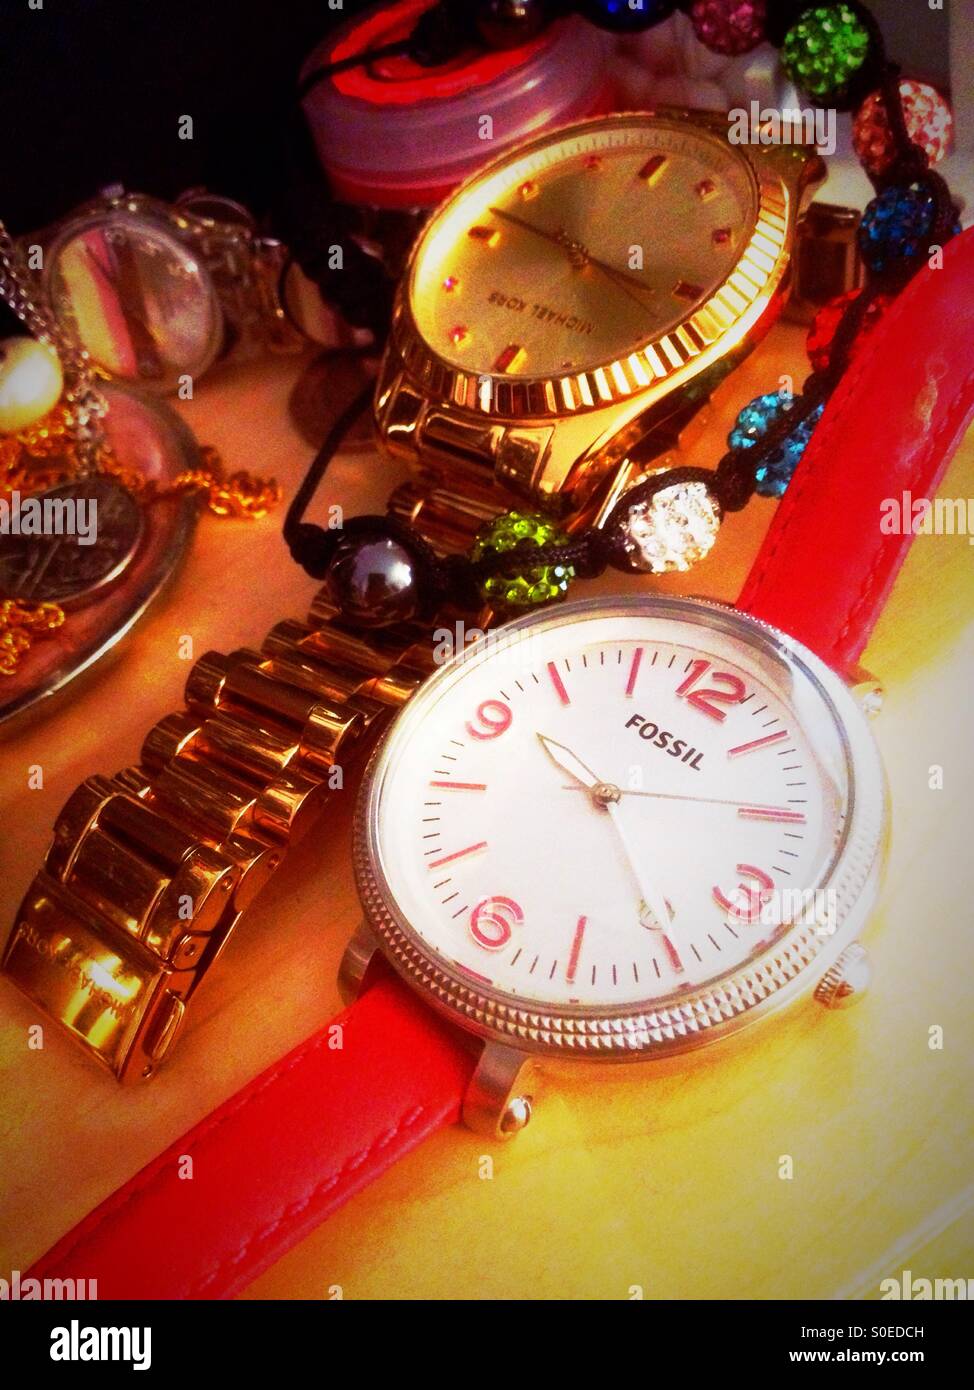 Watches and jewellery Stock Photo - Alamy